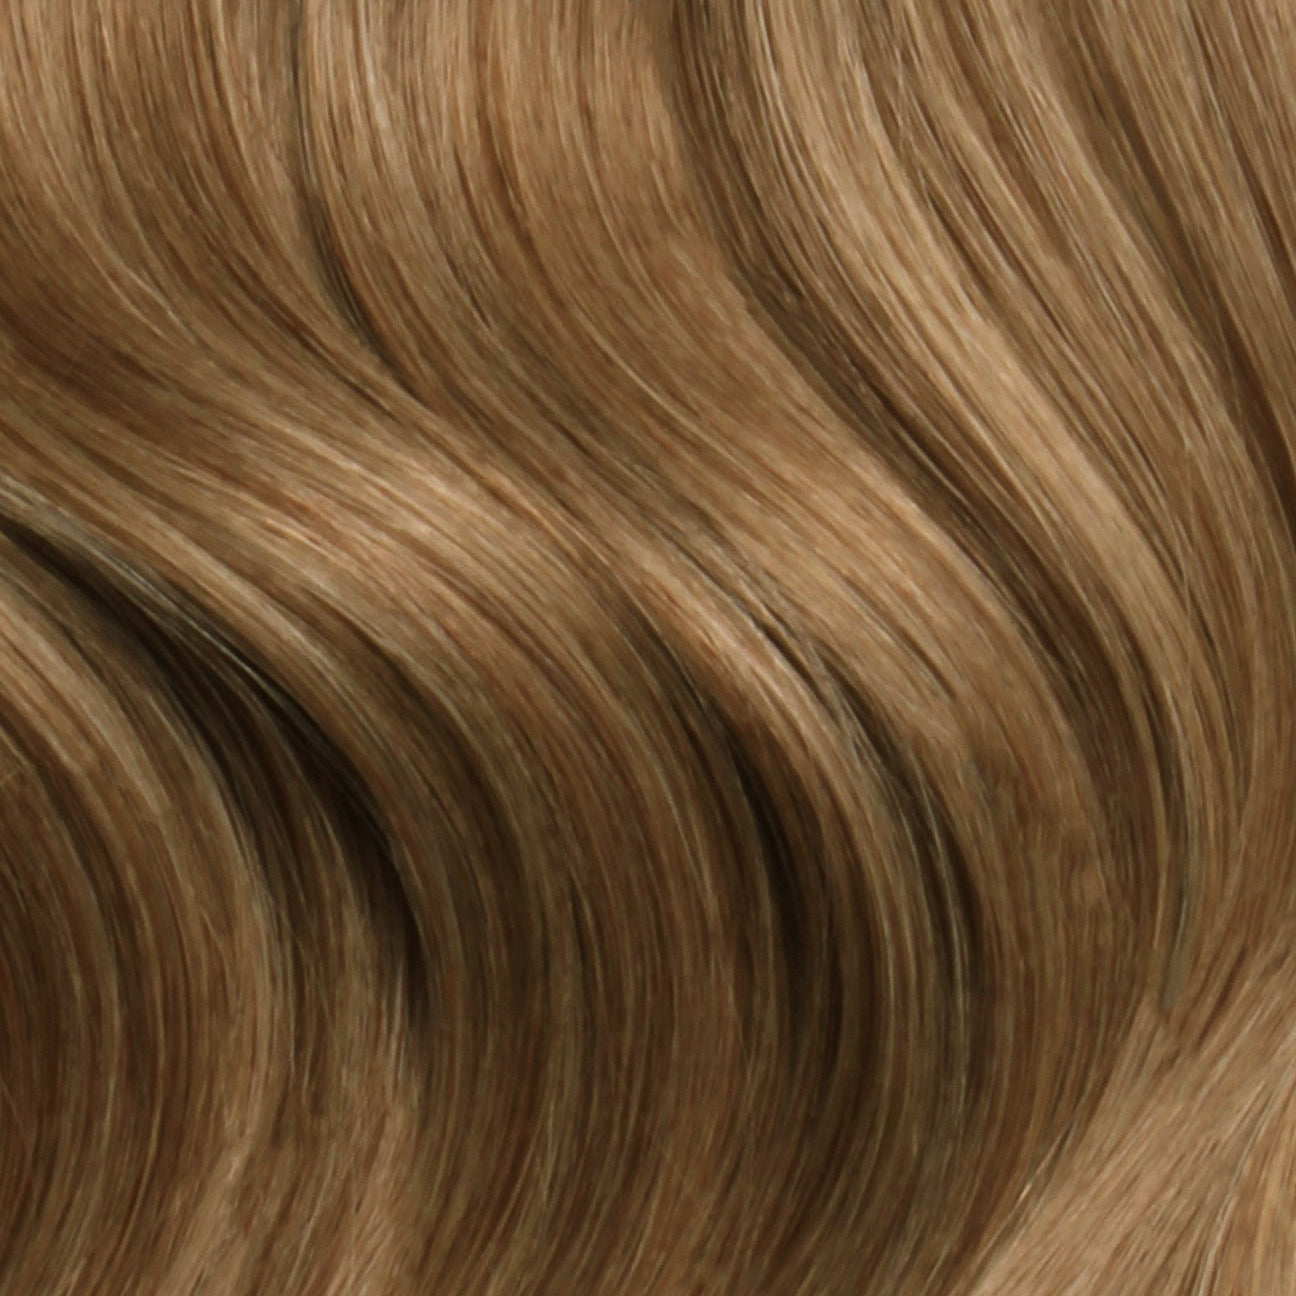 Nano Bonds 18 Inches - SWAY Hair Extensions Chestnut-Blonde-Mix-6-24 Ultra-fine, invisible bonds for a flawless, natural look. 100% Remy Human hair, lightweight and versatile. Reusable and perfect for individual or salon use.